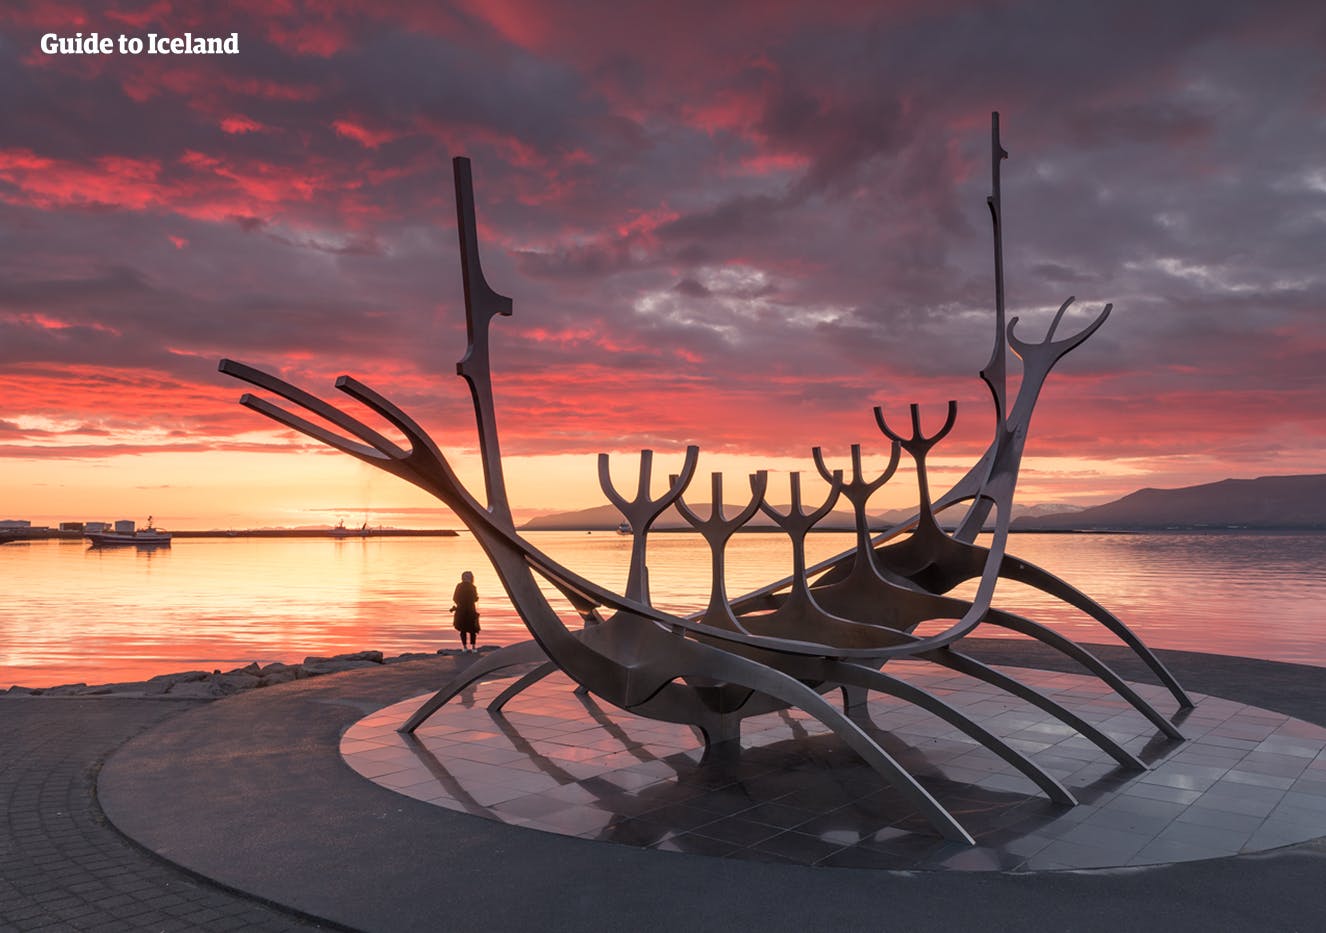 The Sun Voyager, one of the many priceless art sculptures found around Iceland's capital.